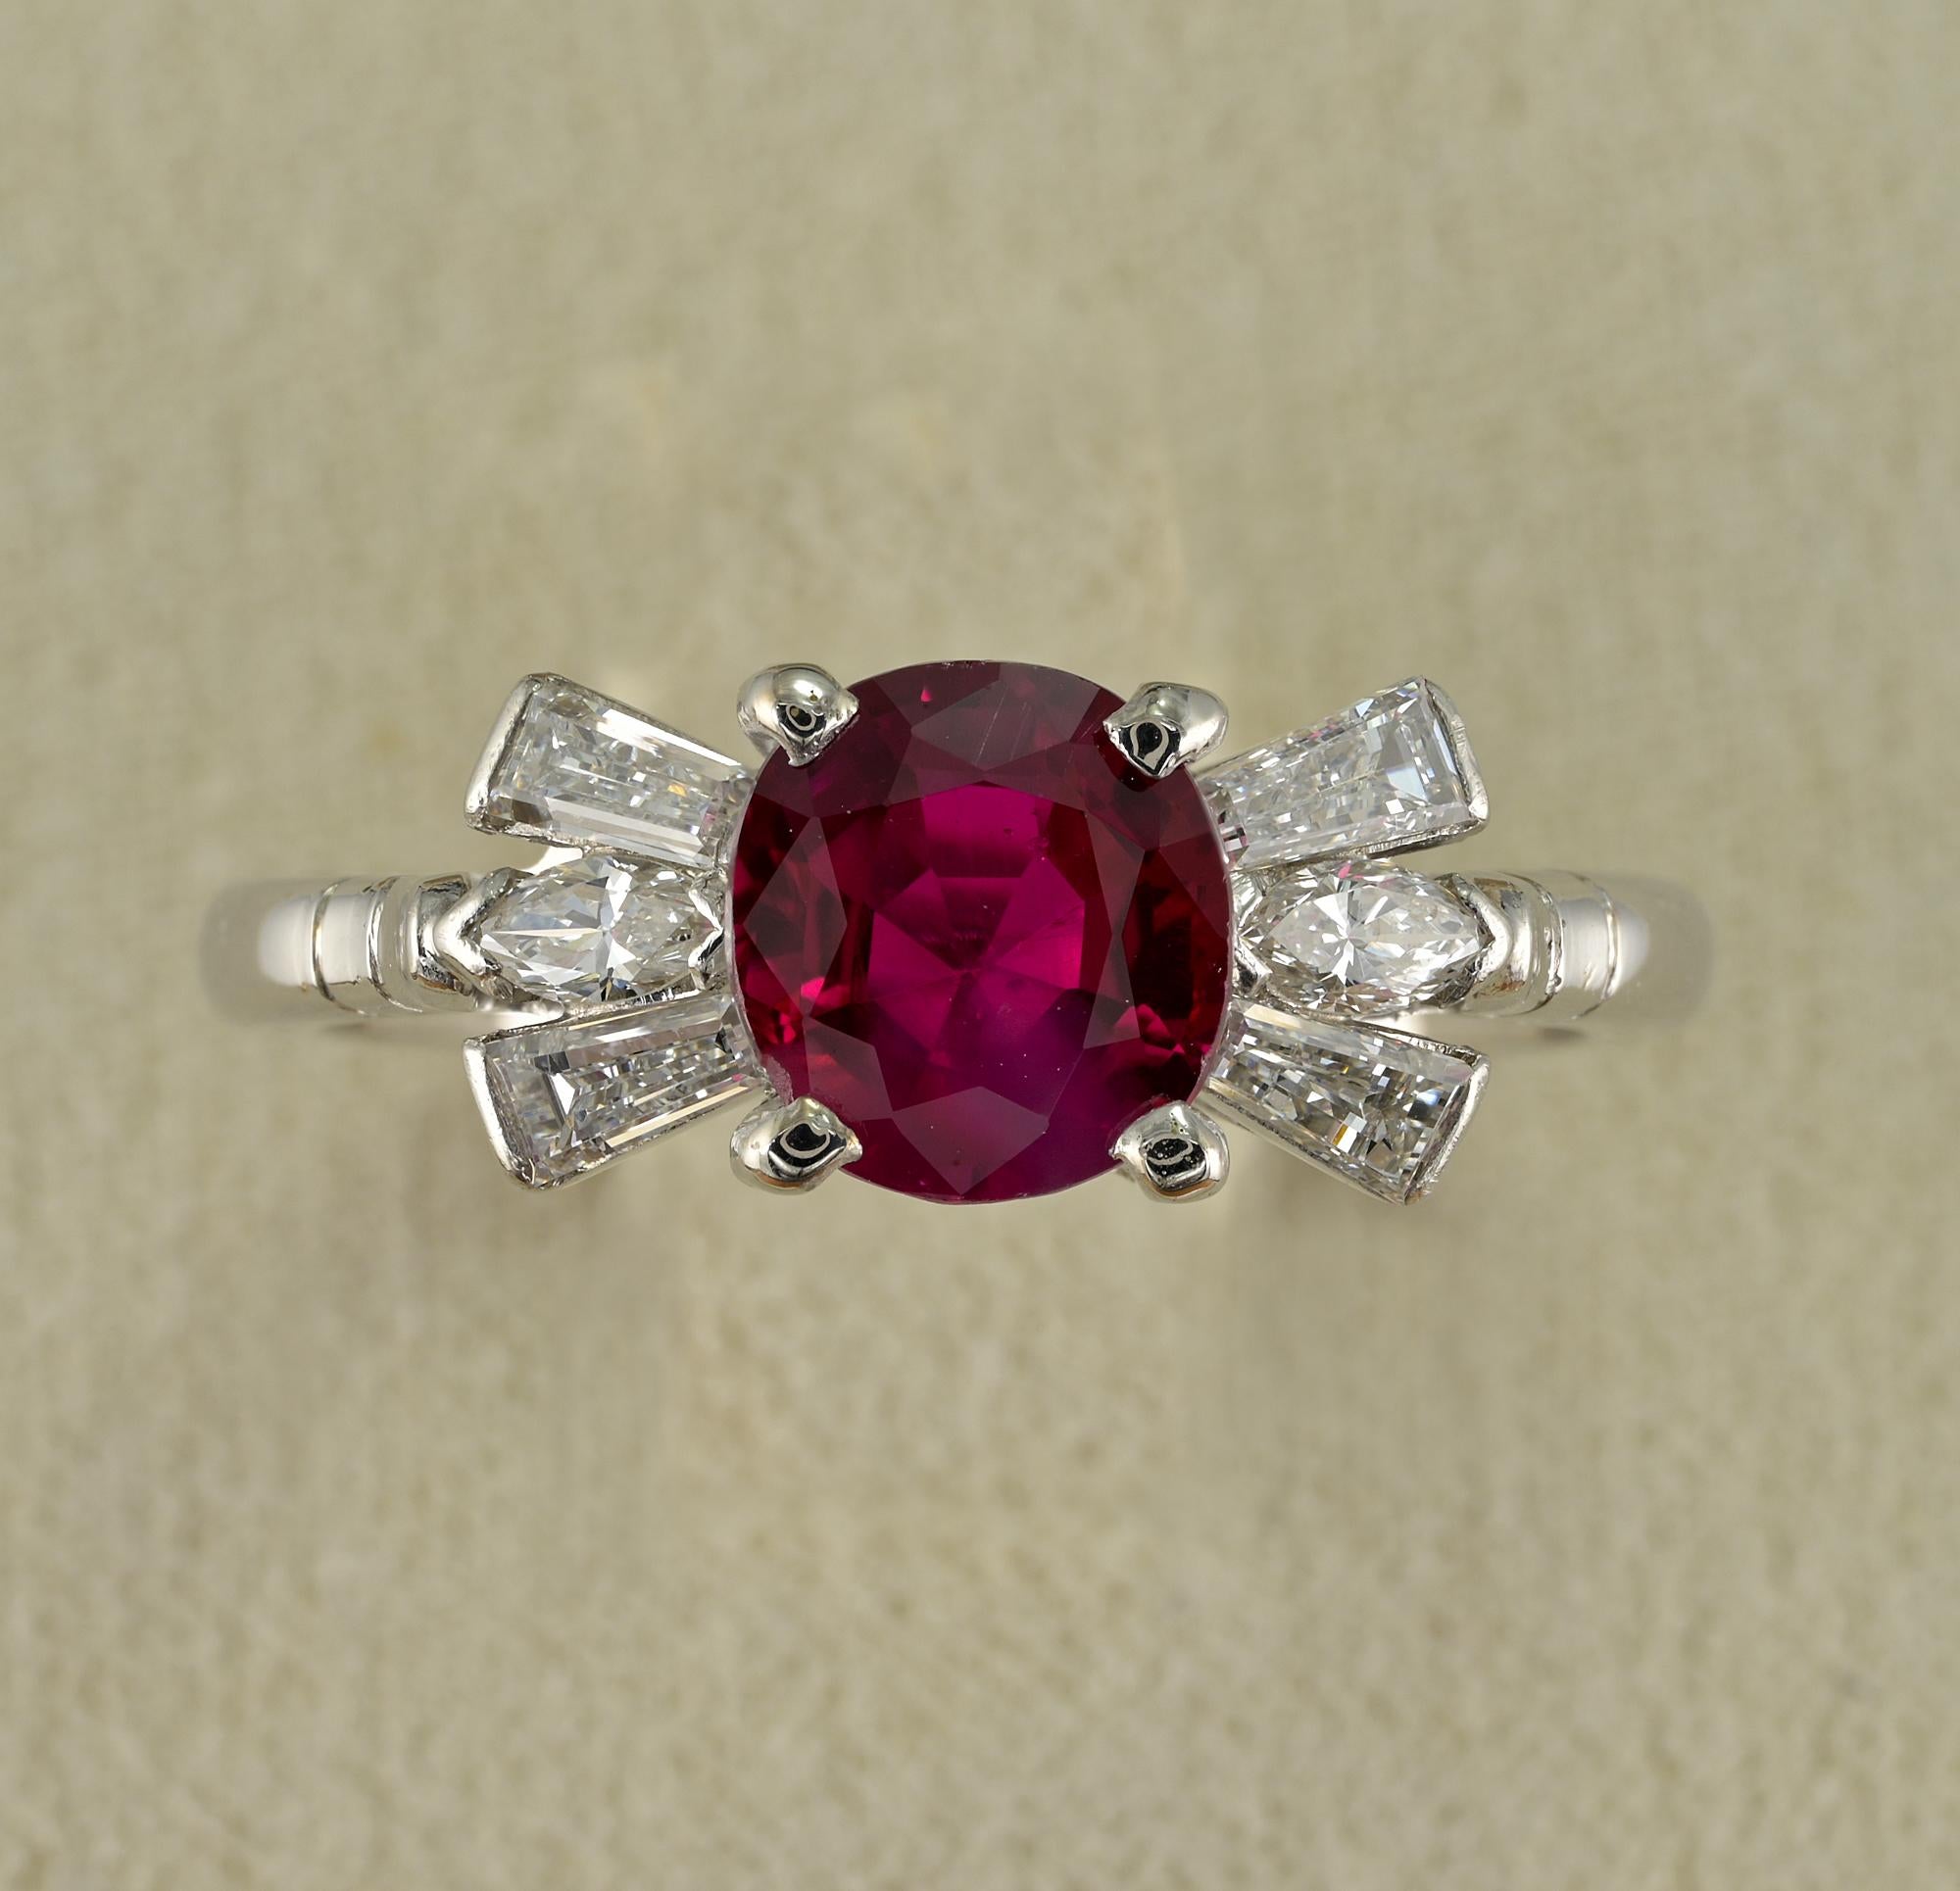 Marvelous mid century Diamond Ruby ring, 1960 ca.
Hand crafted mount of solid 18 KT gold Platinum topped
Elegant timeless design with center Ruby flanked by group of Diamonds between tapered baguette and marquee shaped cut
Focal point is a